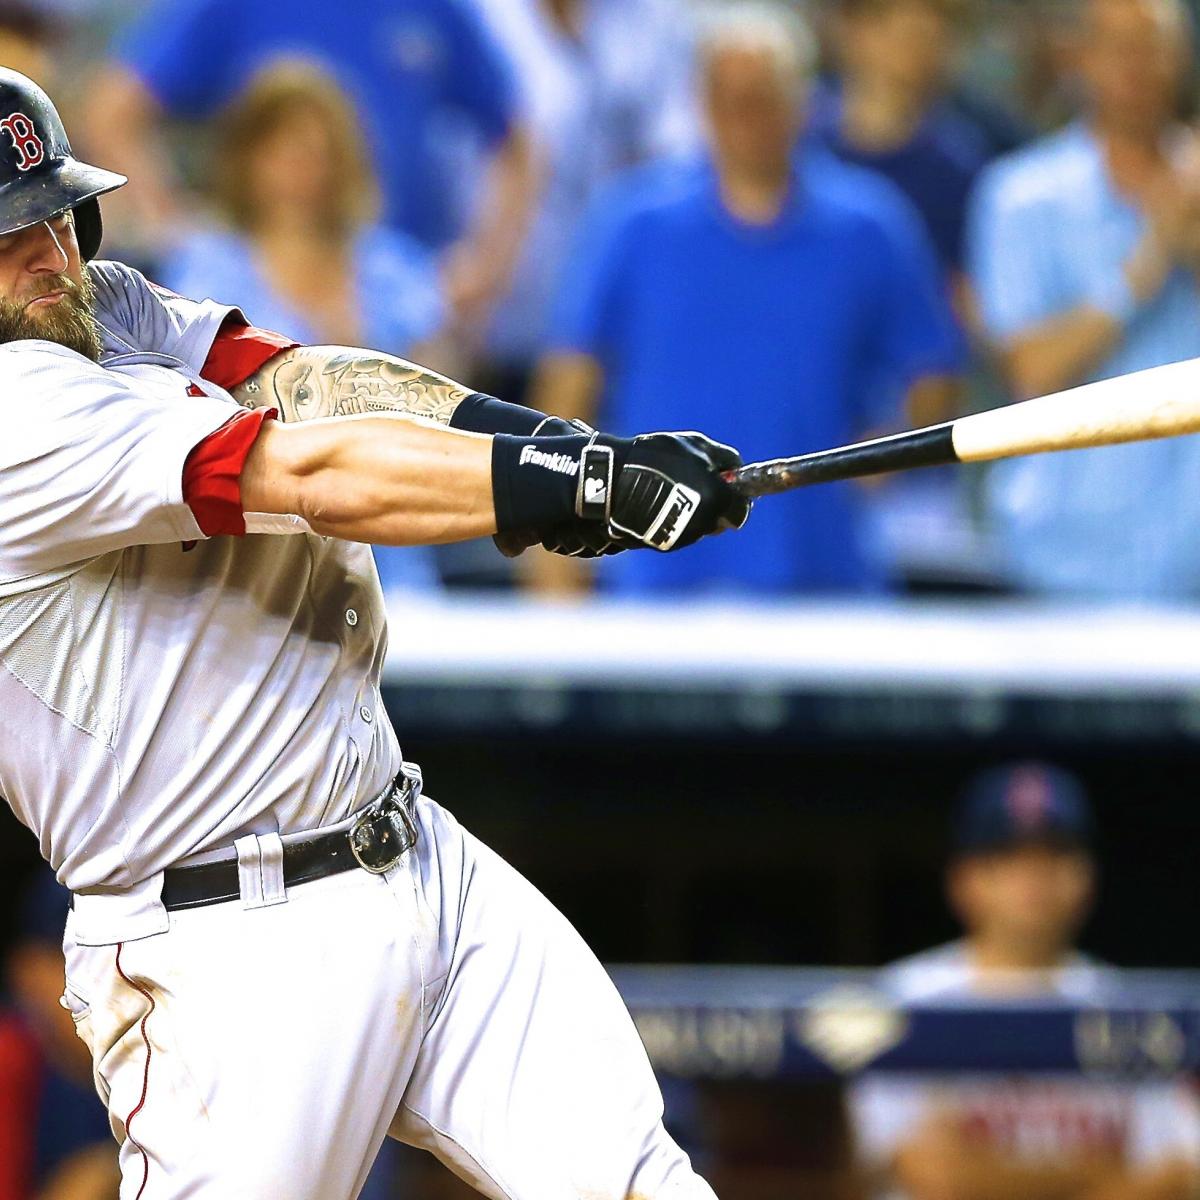 Here's Mike Napoli crushing a home run into Rogers Centre's fifth deck